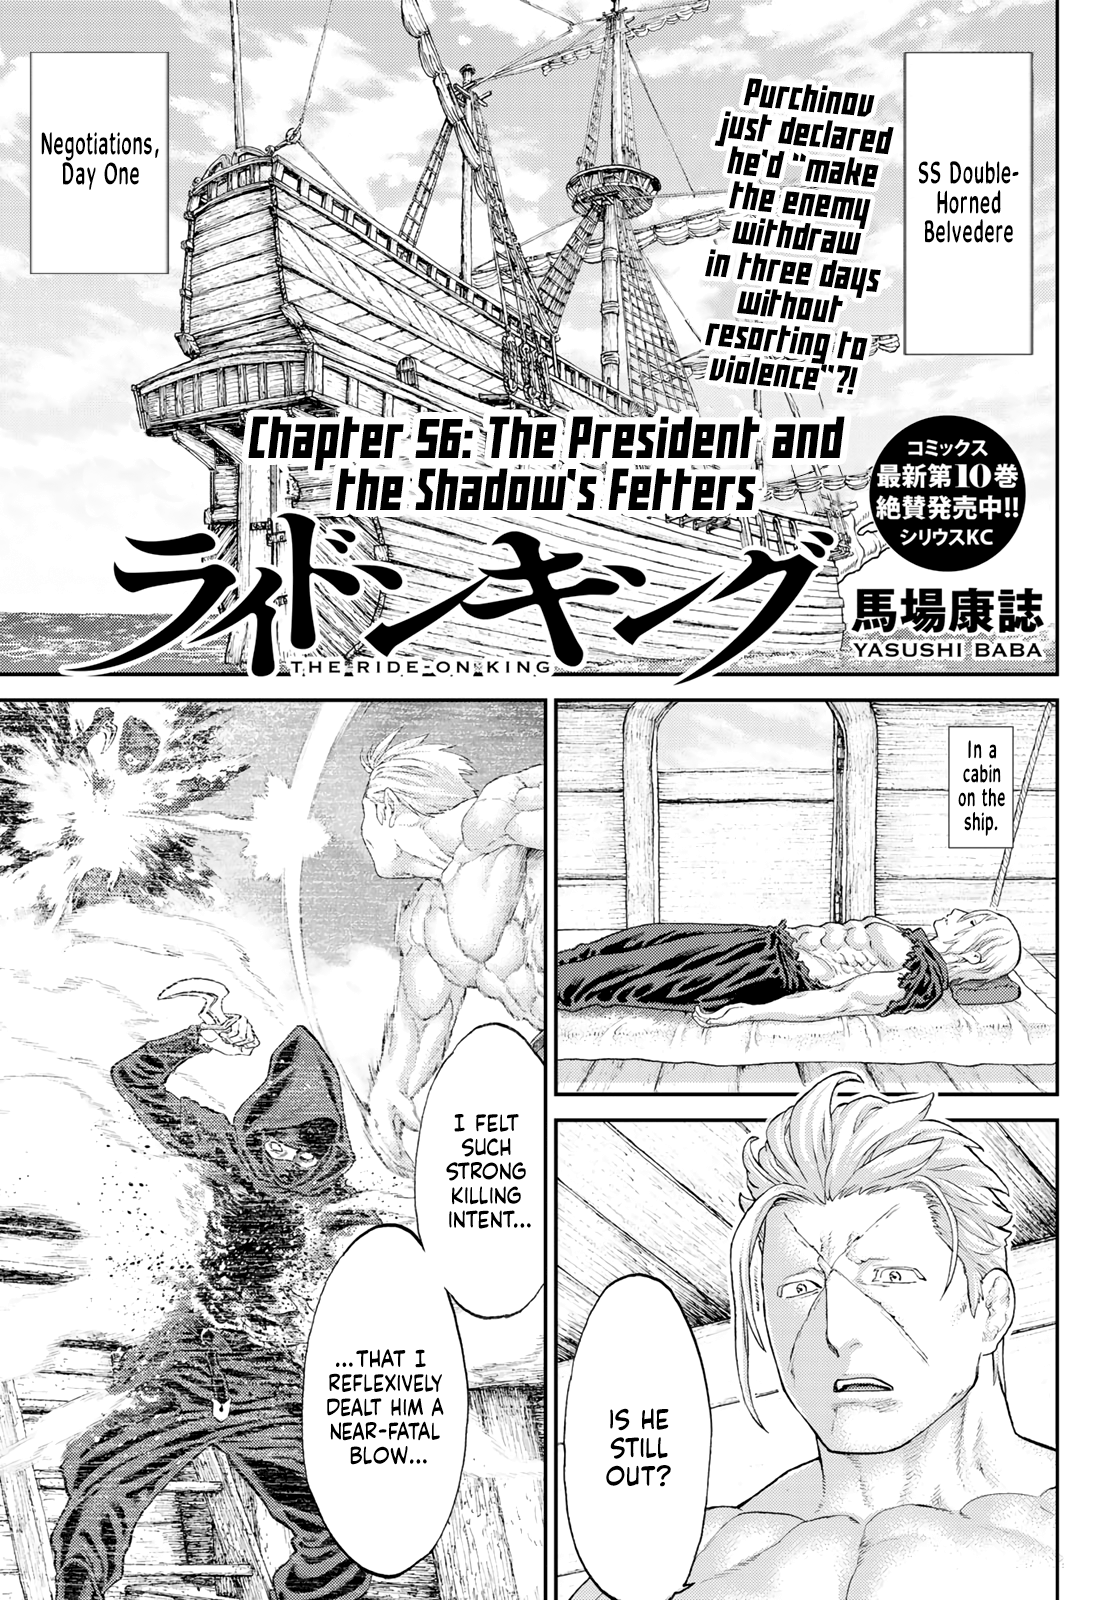 The Ride-On King Chapter 56: The President And The Shadow's Fetters - Picture 1